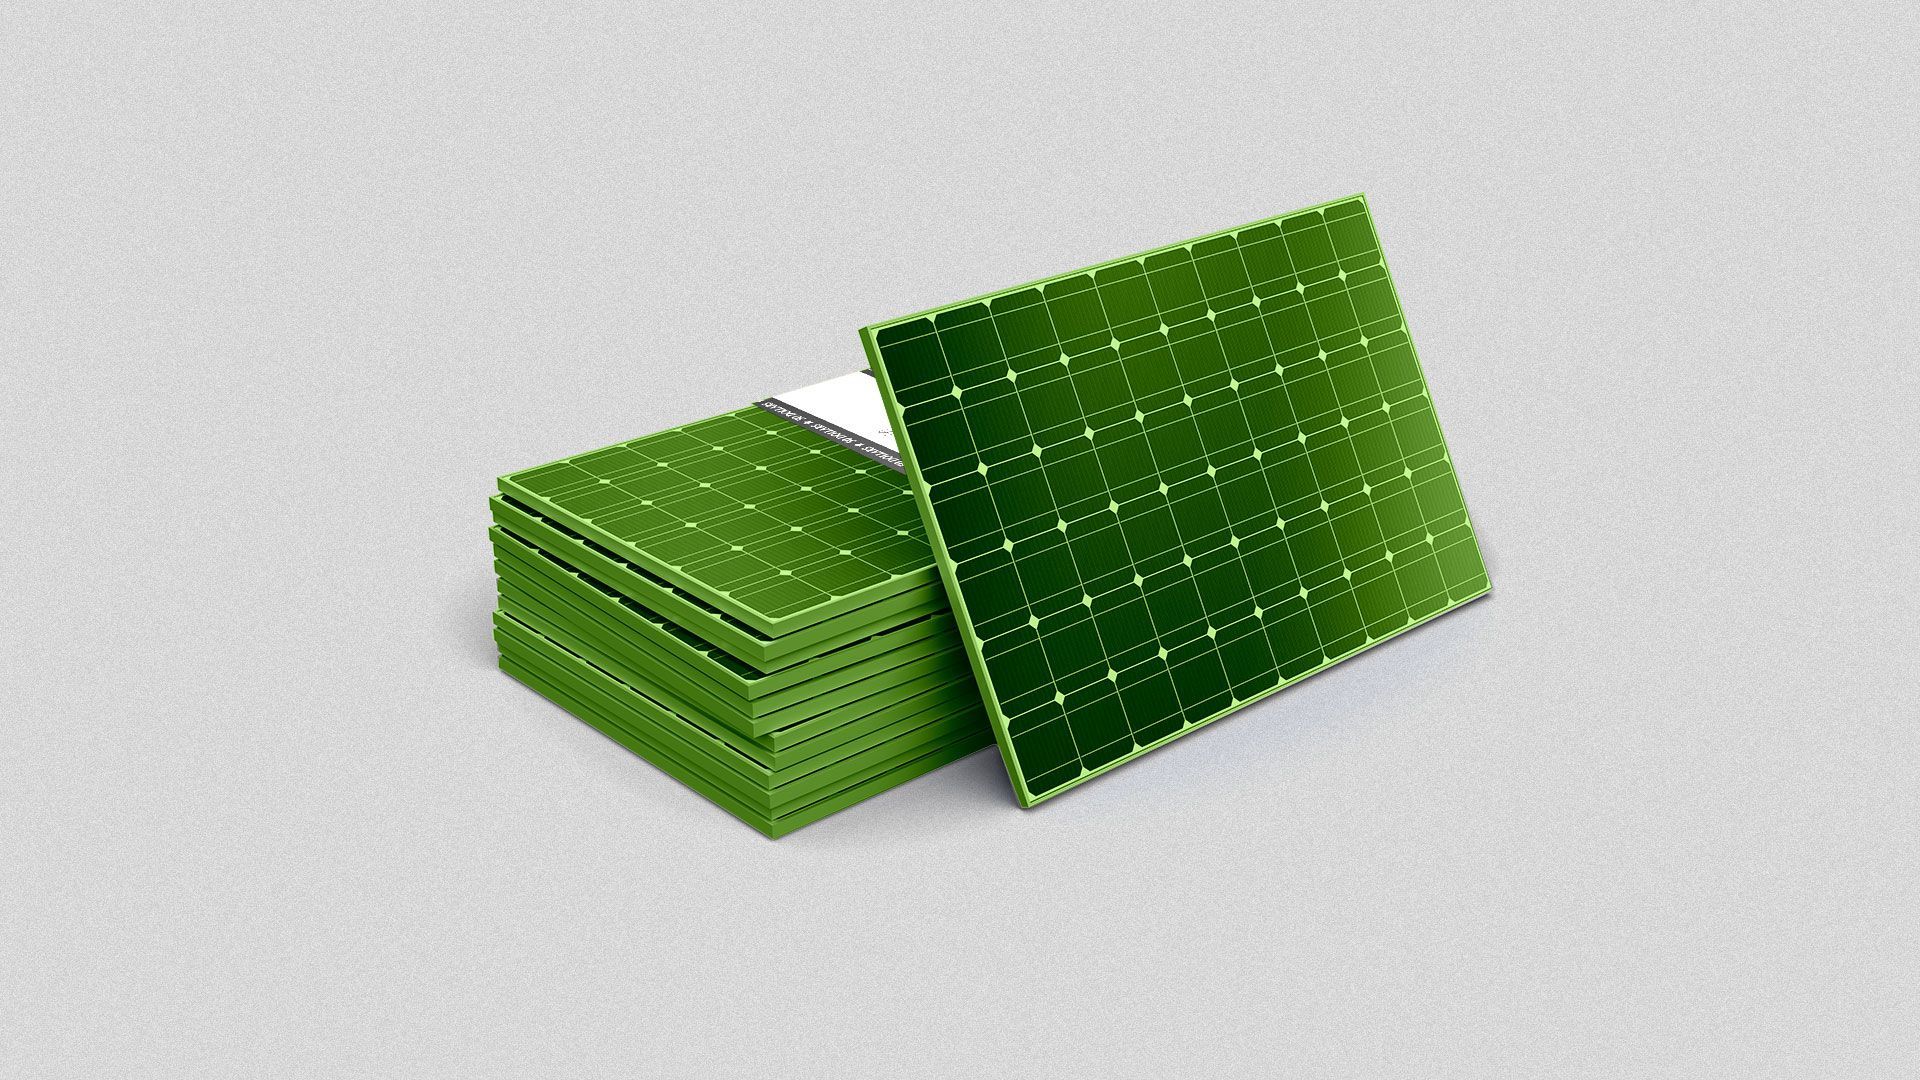 Illustration of a stack of solar panels with a currency band 